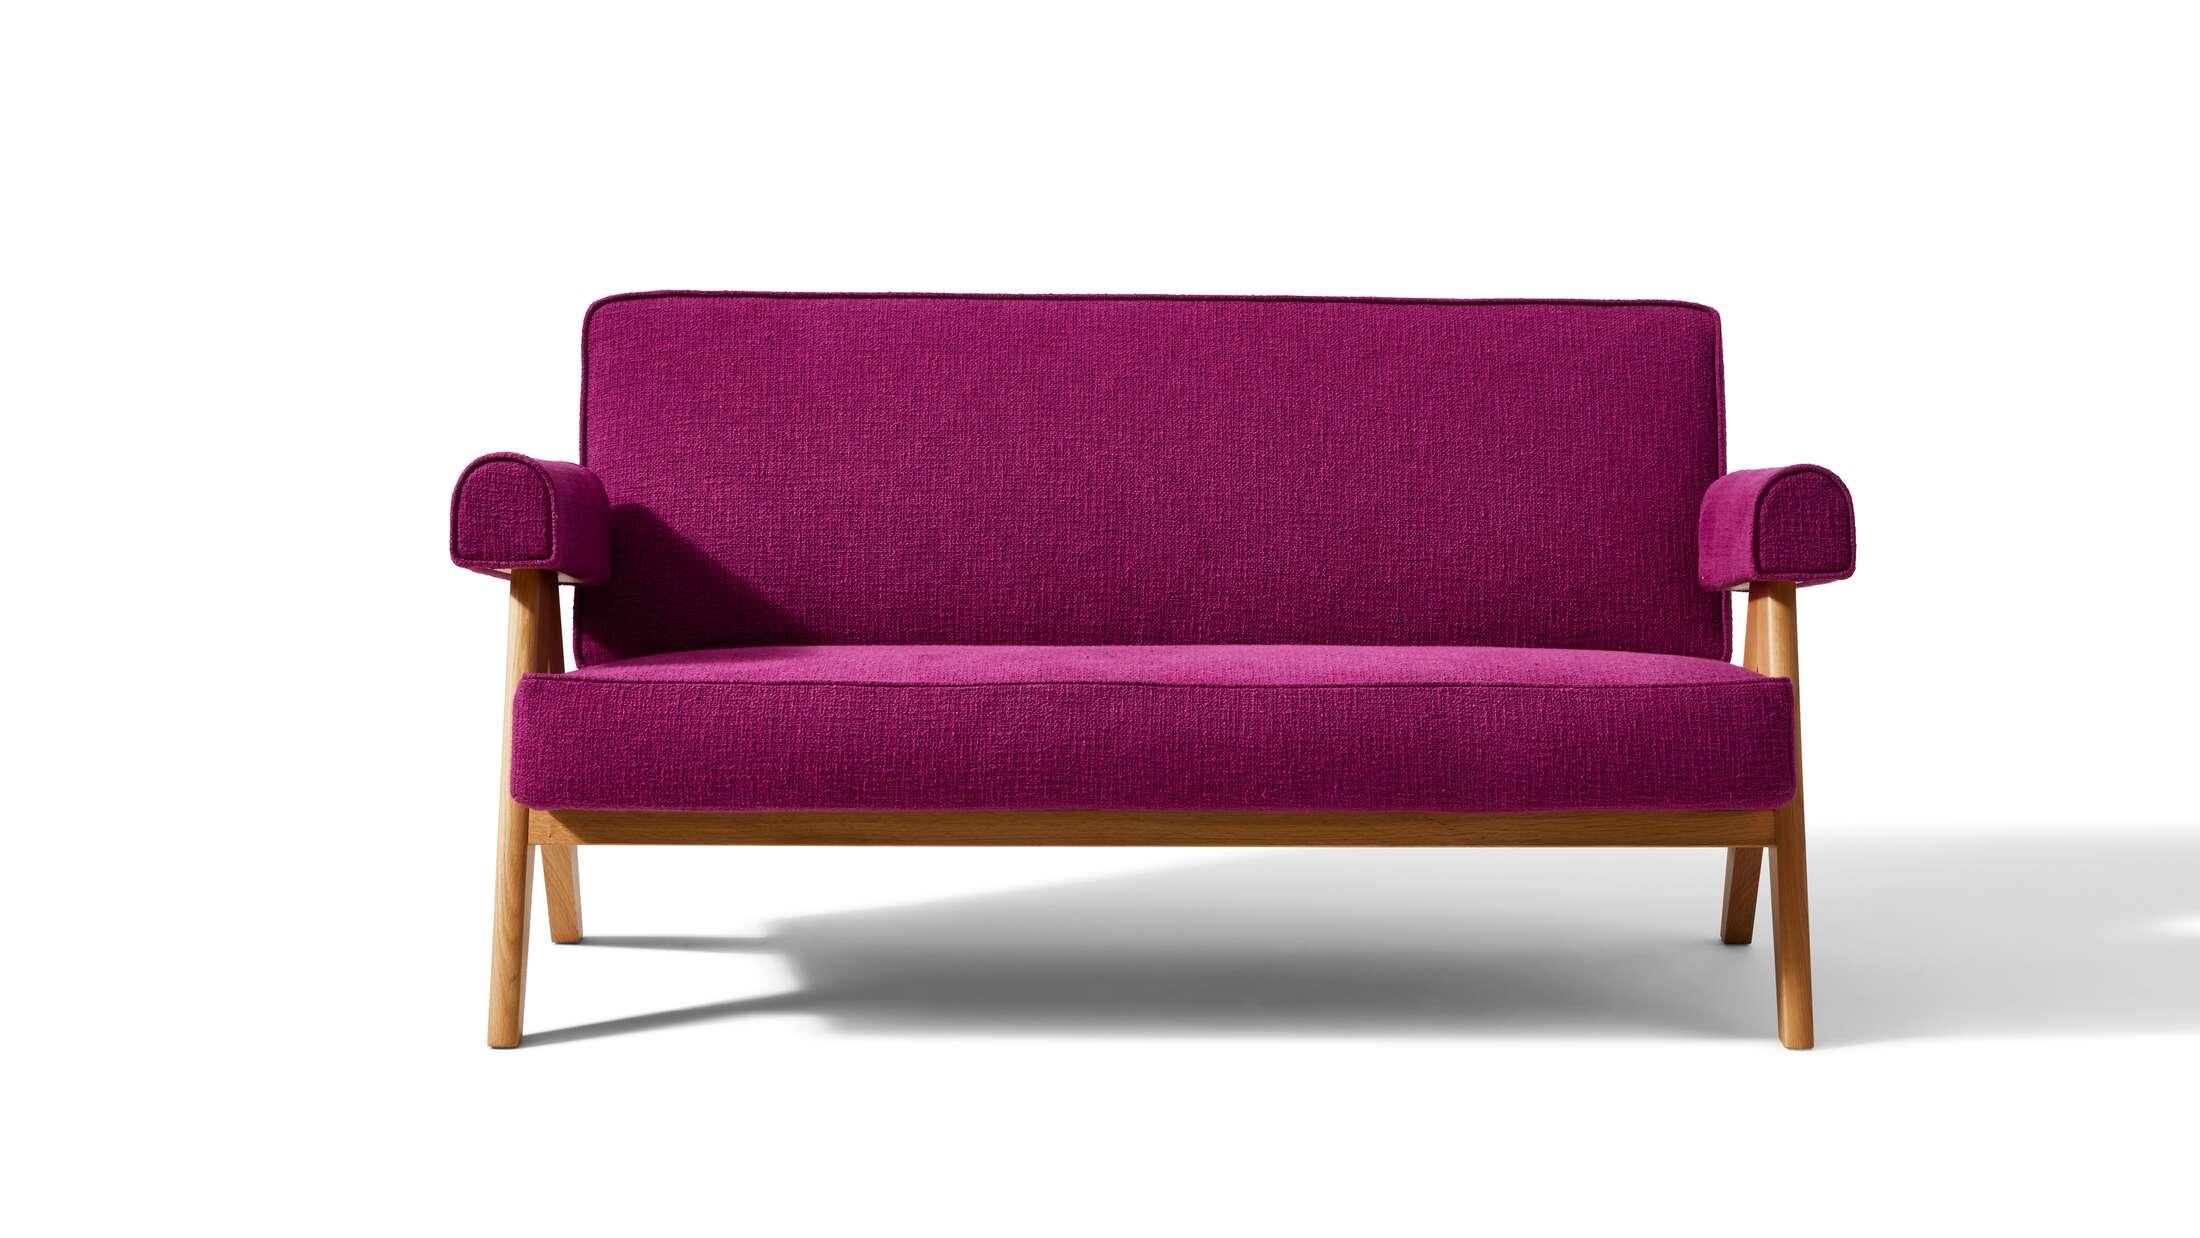 Mid-Century Modern Pierre Jeanneret Capitol Complex Sofa Settee in Purple for Cassina, Italy - New  For Sale